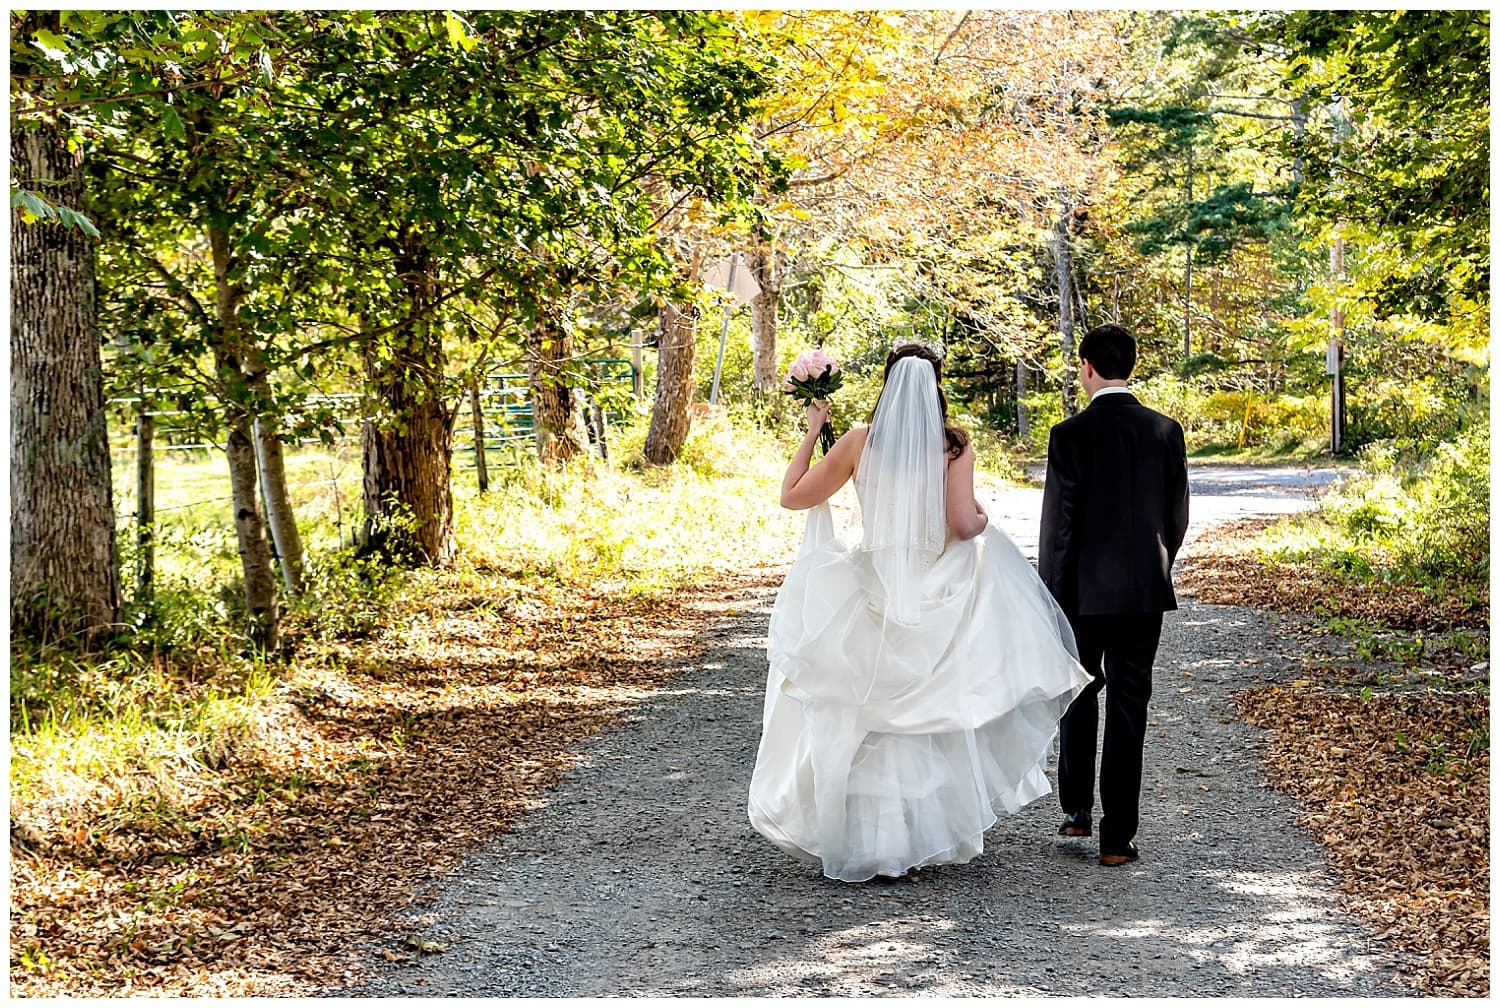 A bride and groom walk along a forest pathway on their way to their wedding ceremony at the Kinley farm in Lunenburg, NS.